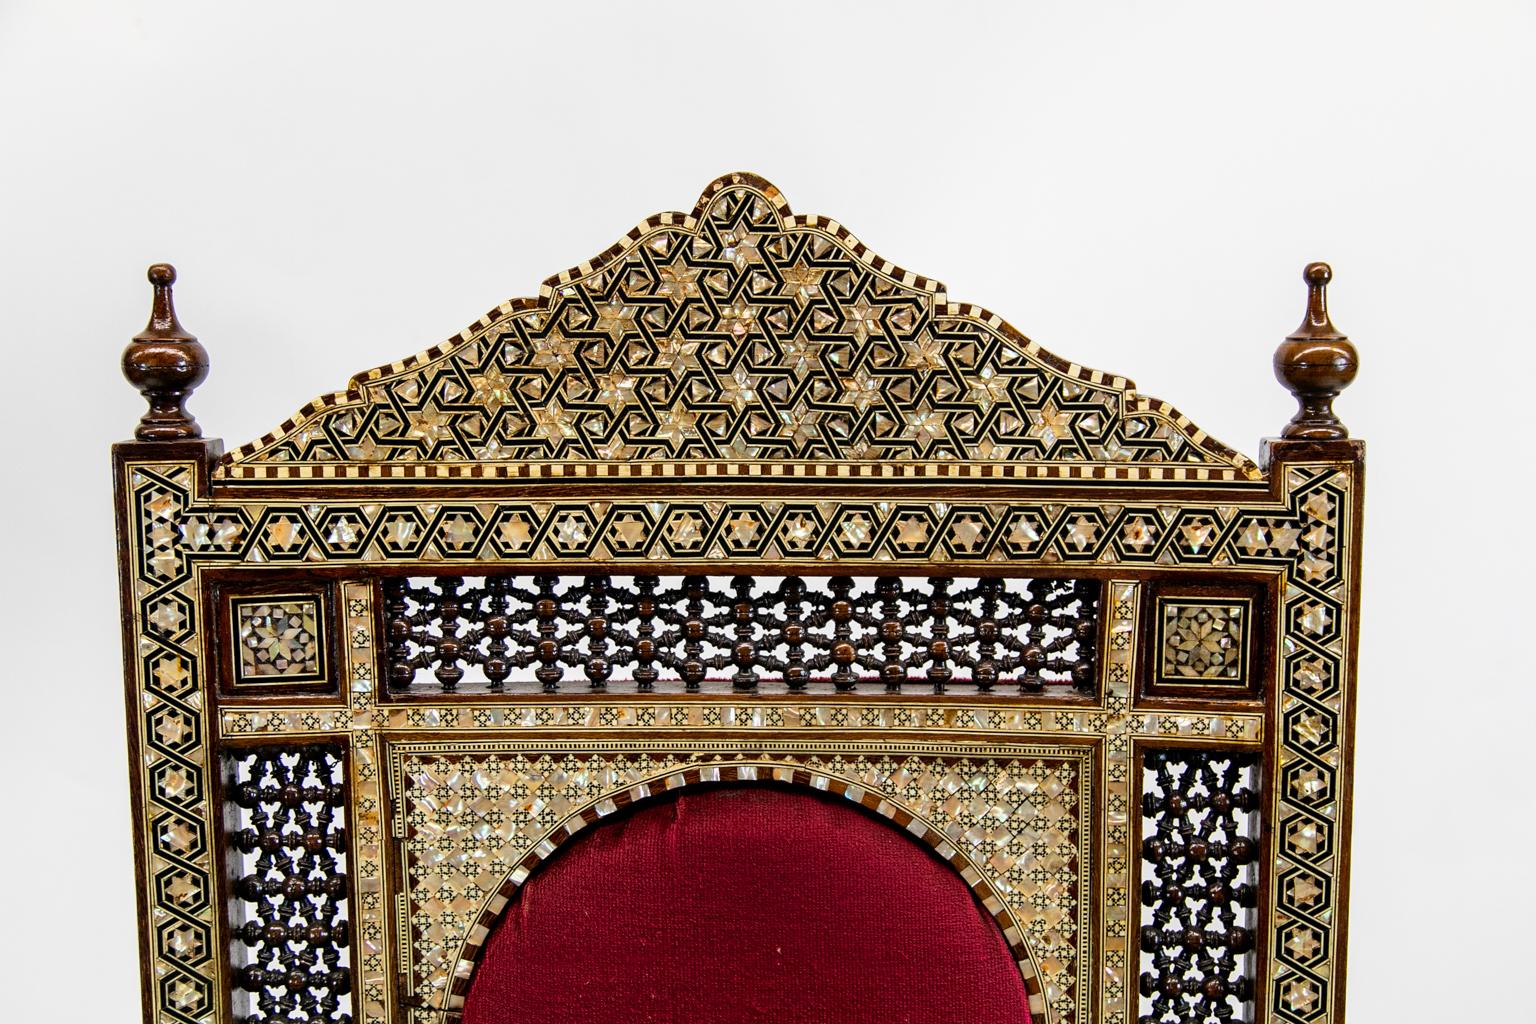 Inlaid Moroccan armchair, is profusely inlaid with bone and mother of pearl inlays in geometric patterns. The panels have interlaced ball and stick carvings. The top of the arms are inlaid with ebony and bone in stylized arabesque patterns.